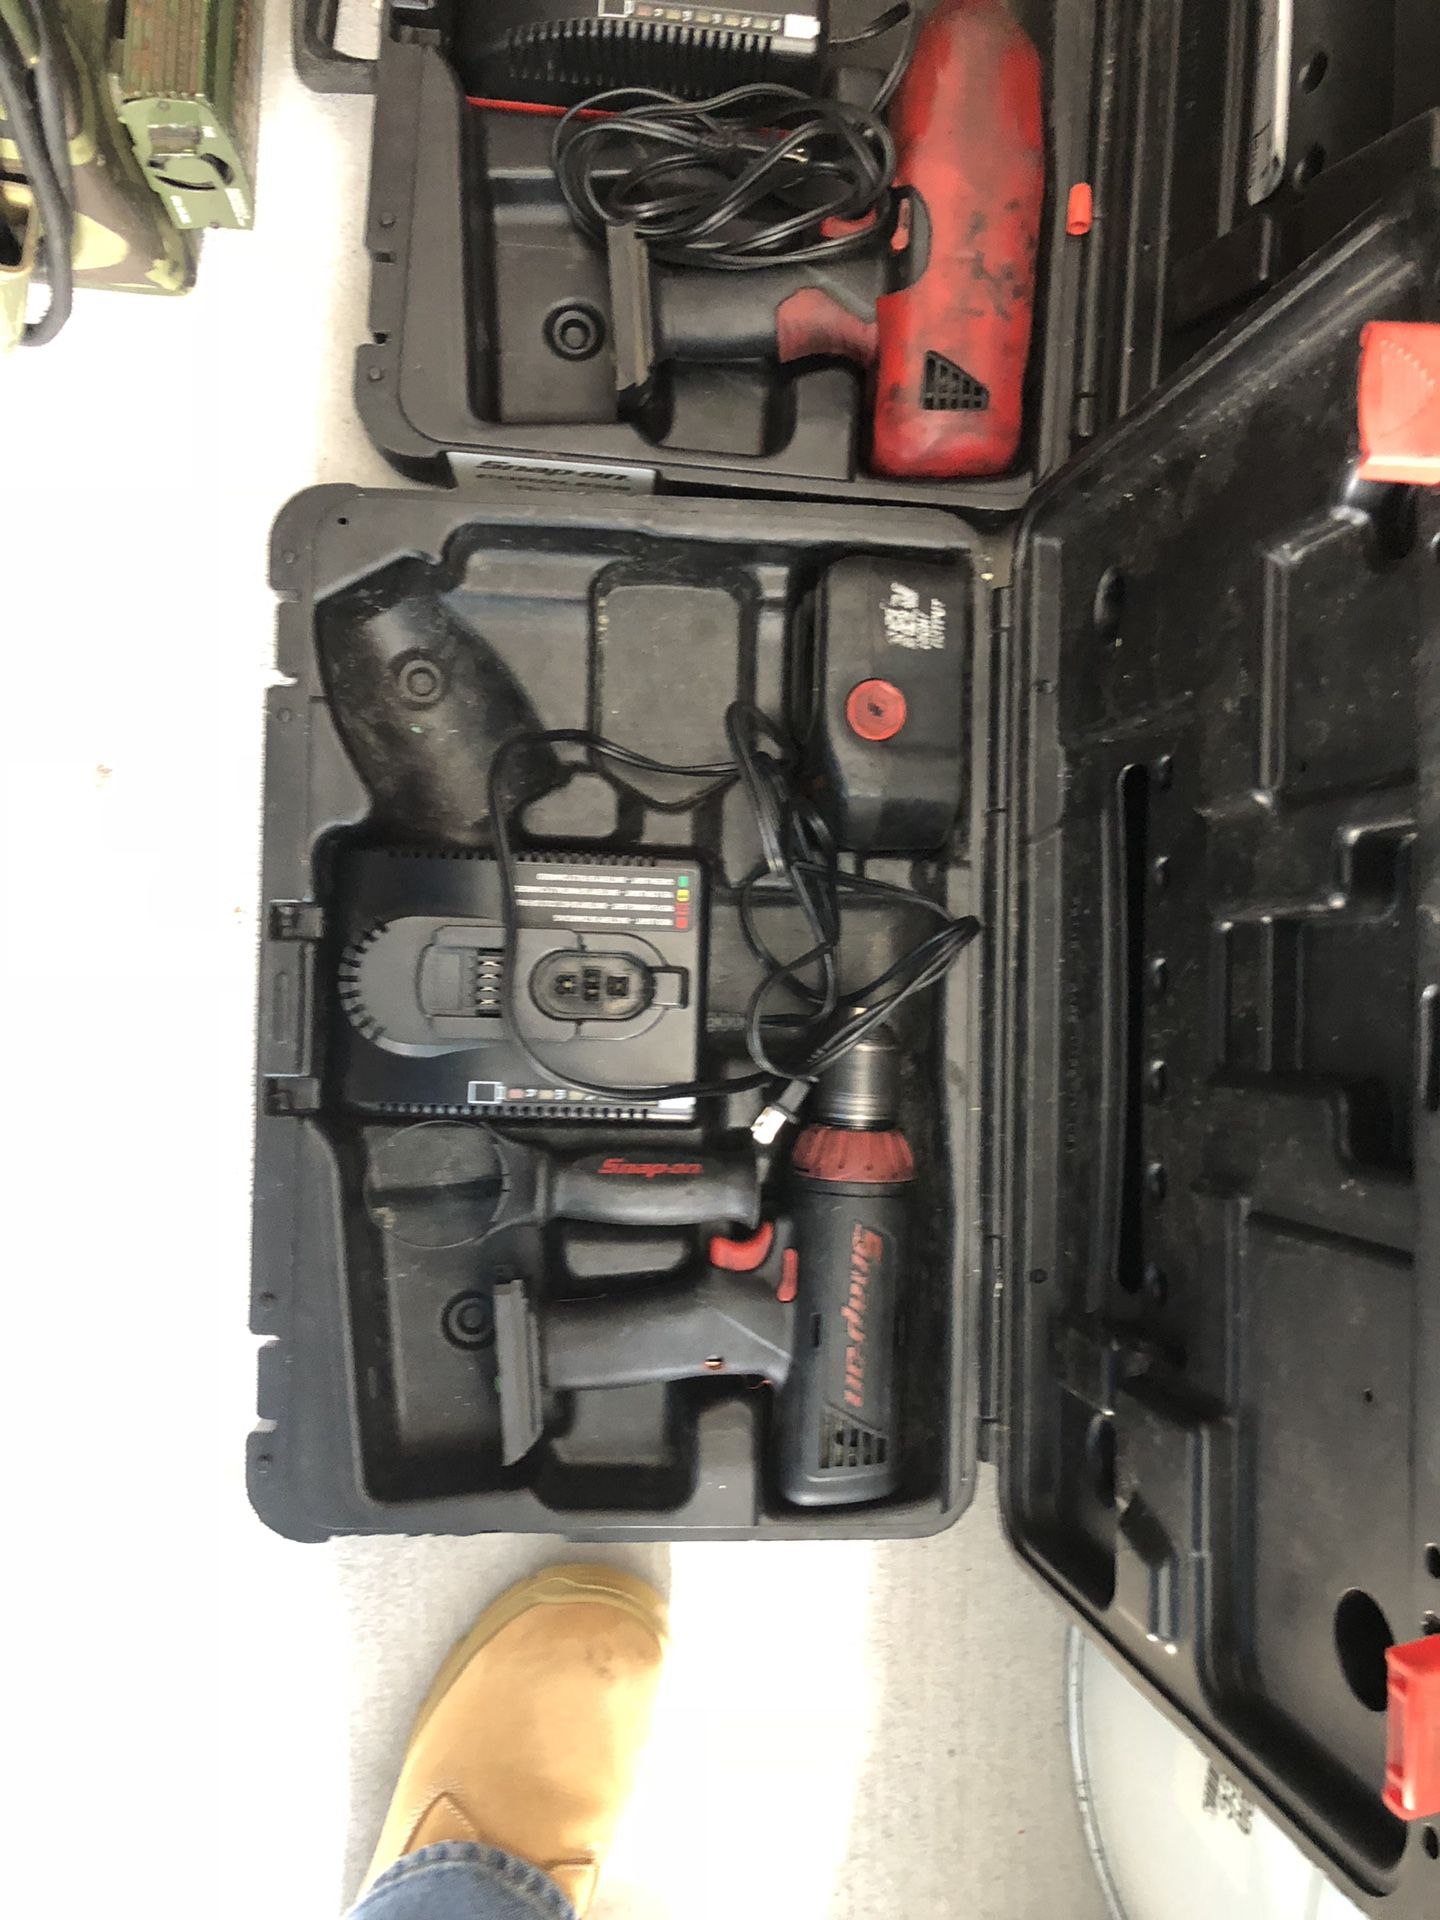 Snap on drill and impact driver